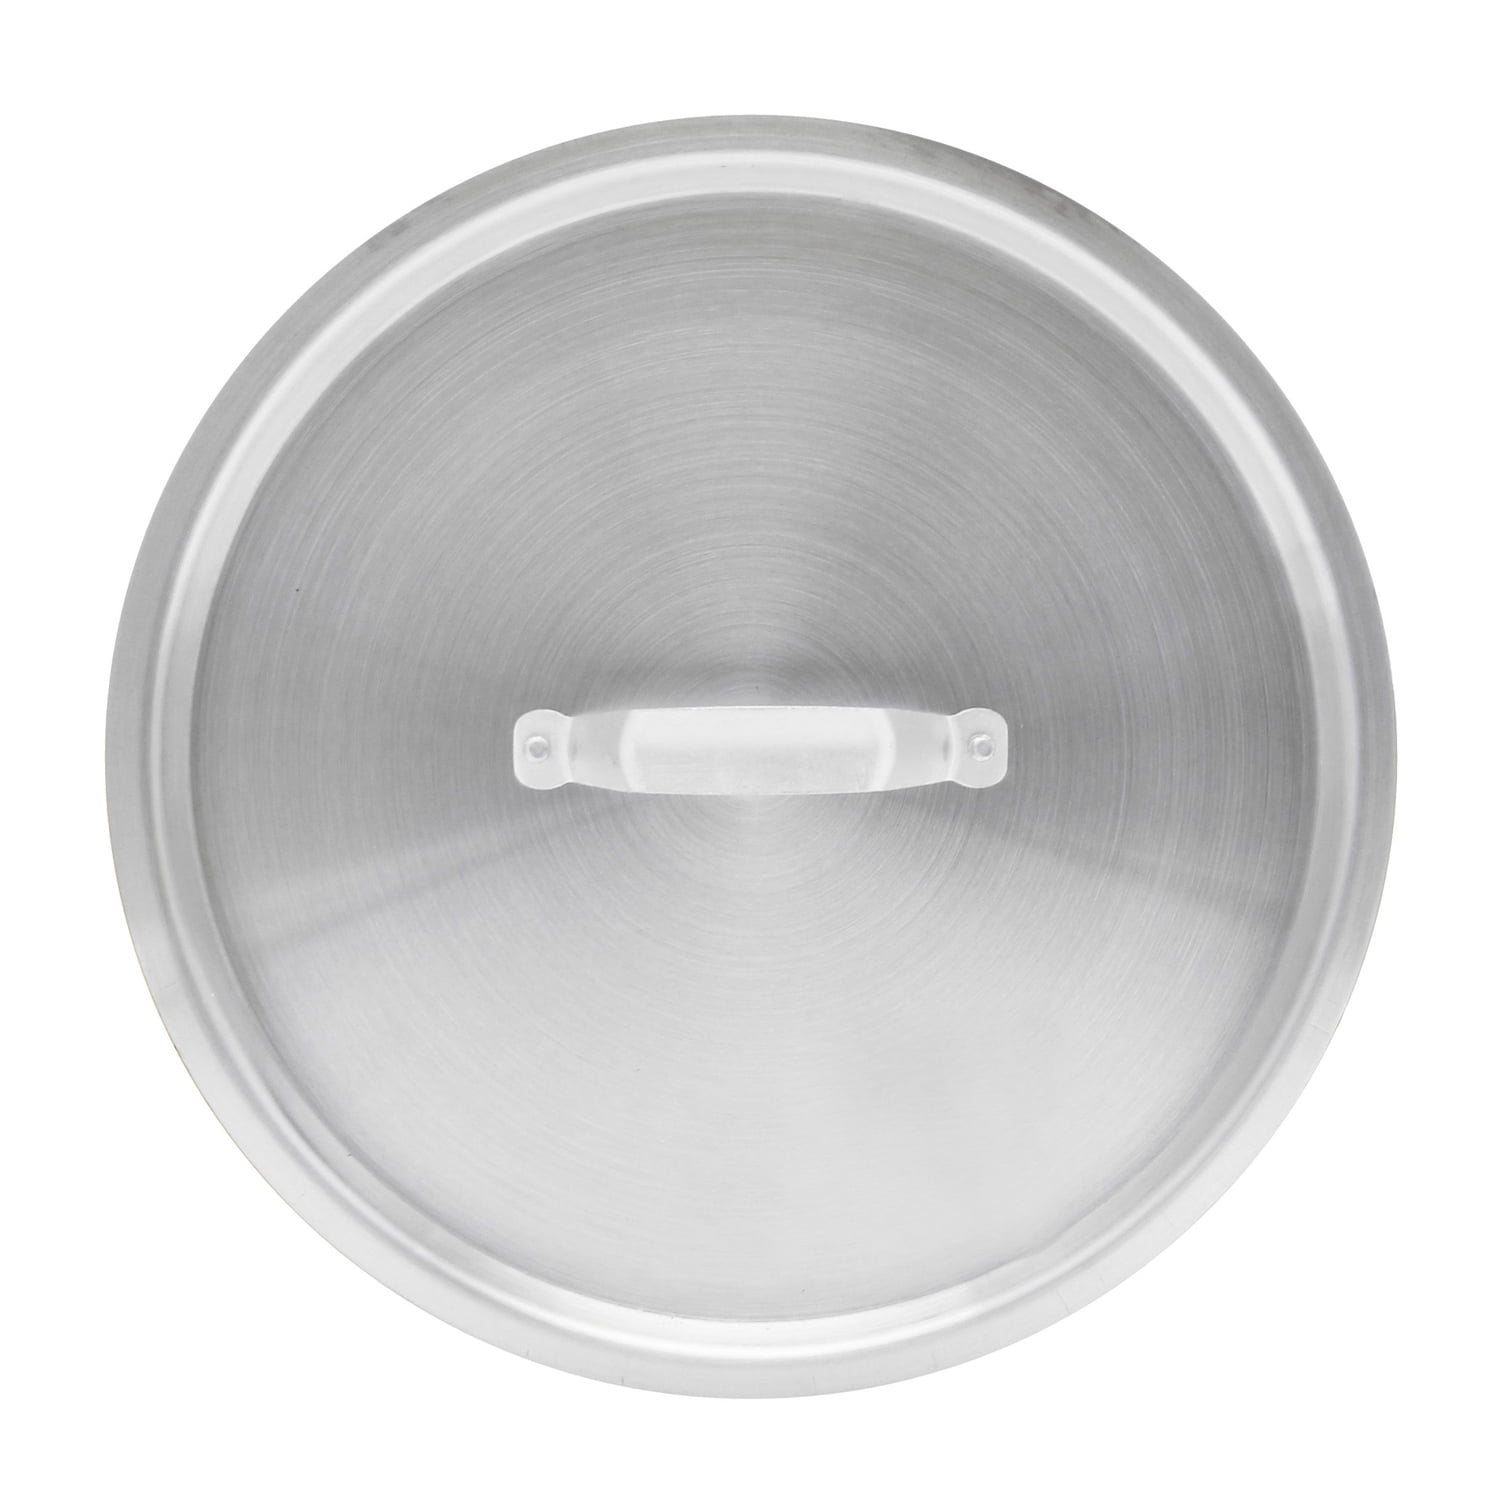 Silicone Pan Lids - NSF Listed